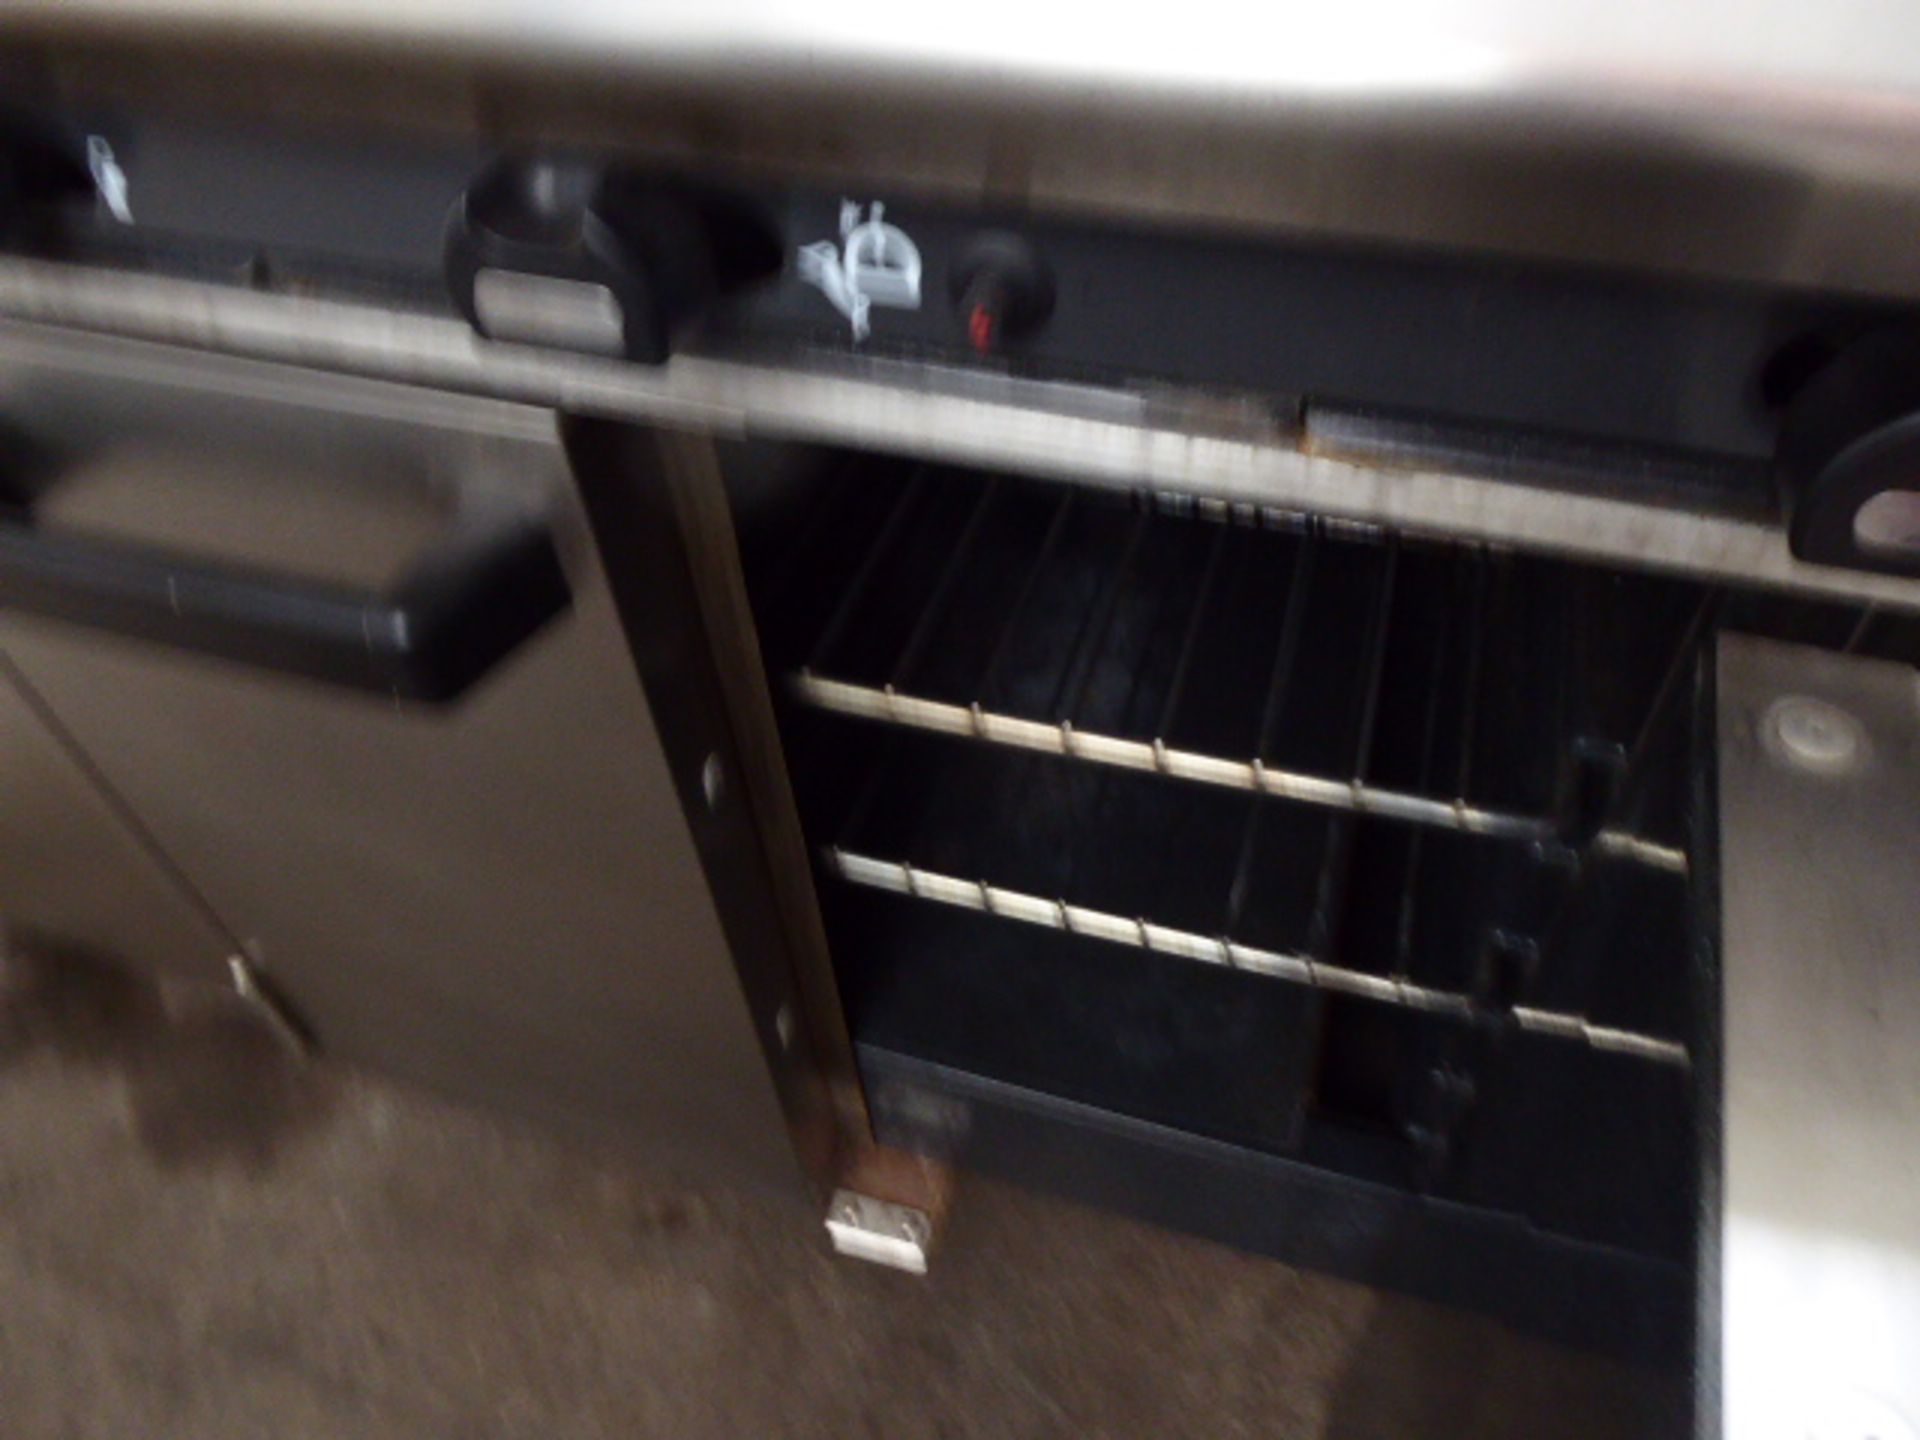 90cm gas Blue Seal solid top griddle and 2 burner cooker with double door oven under - Image 3 of 3